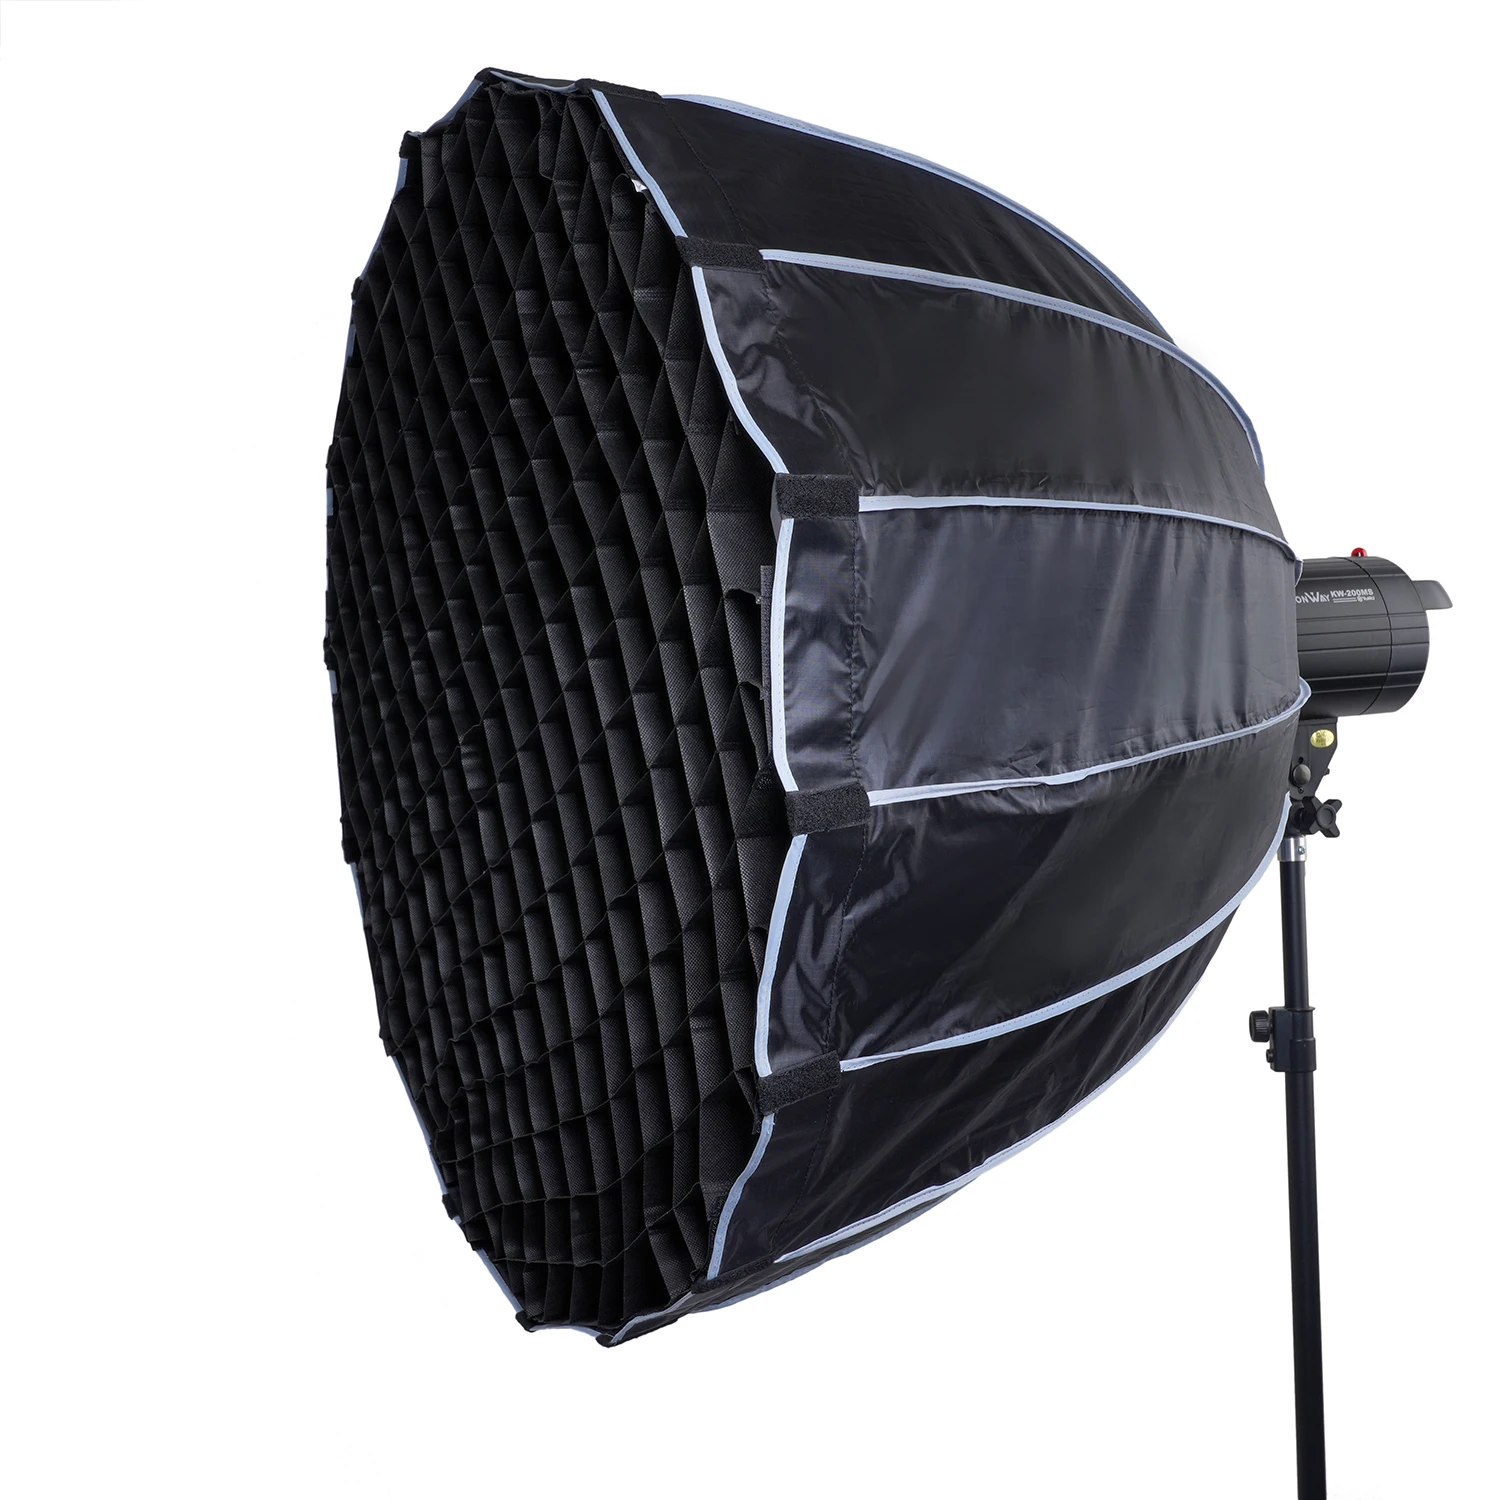 

55cm 90cm Quickly Release 16 Metal Rods Parabolic Deep Softbox +Honeycomb Grid with Bowens Mount for Photo Studio Flash Lamp